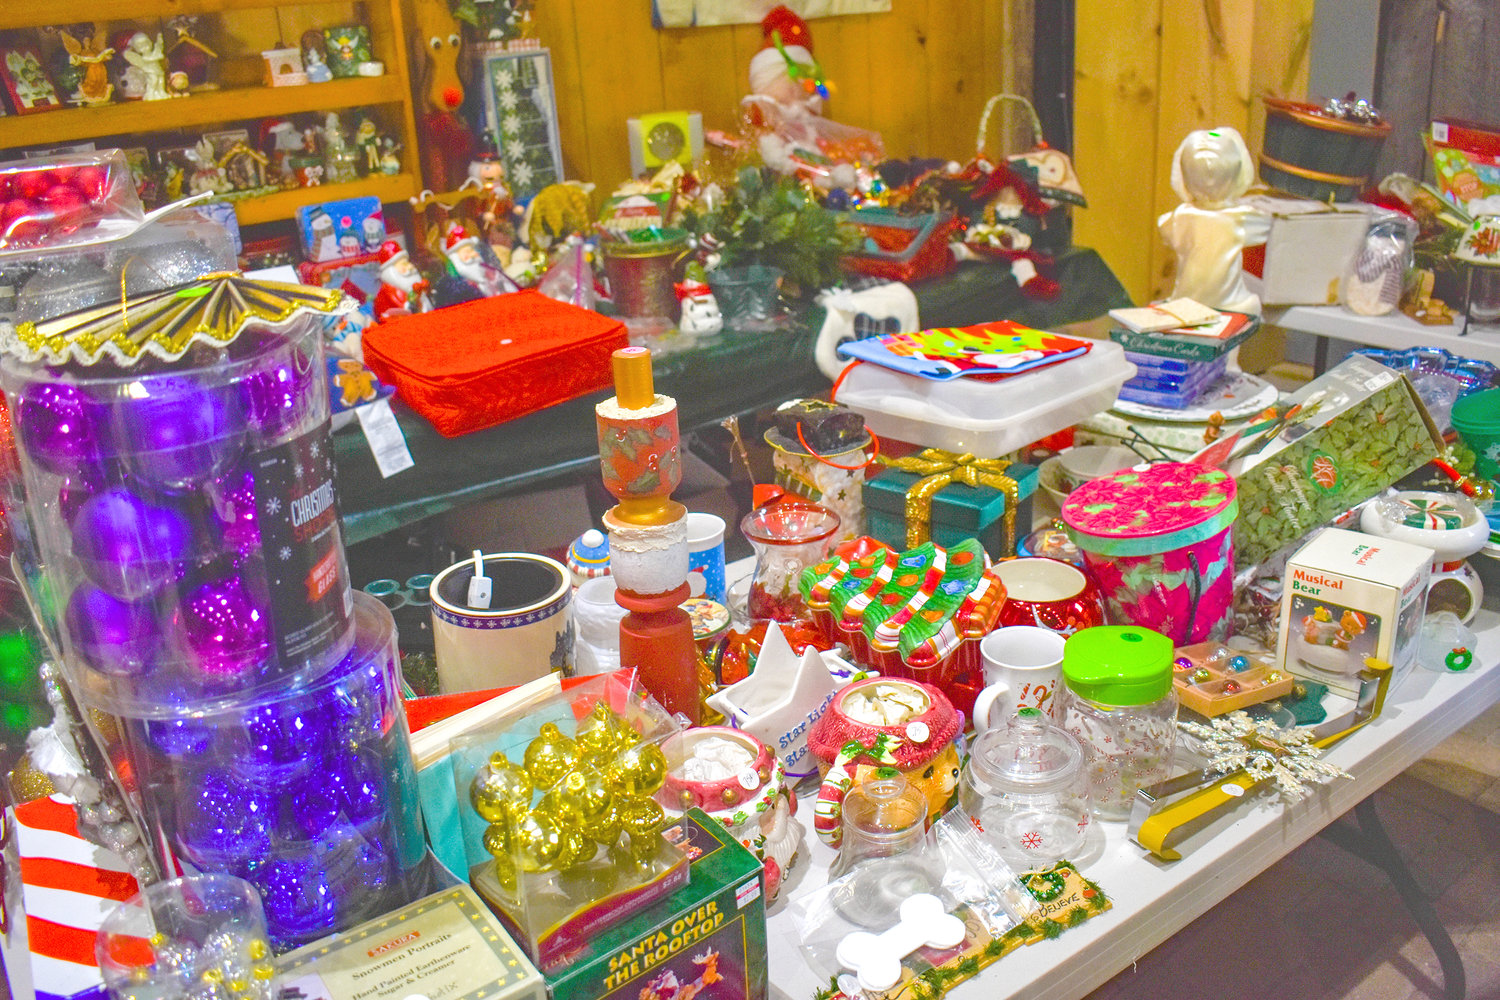 Holiday decor is available at the Great Swamp Conservancy garage sale this weekend, July 8-9, 9 a.m. - 3 p.m.